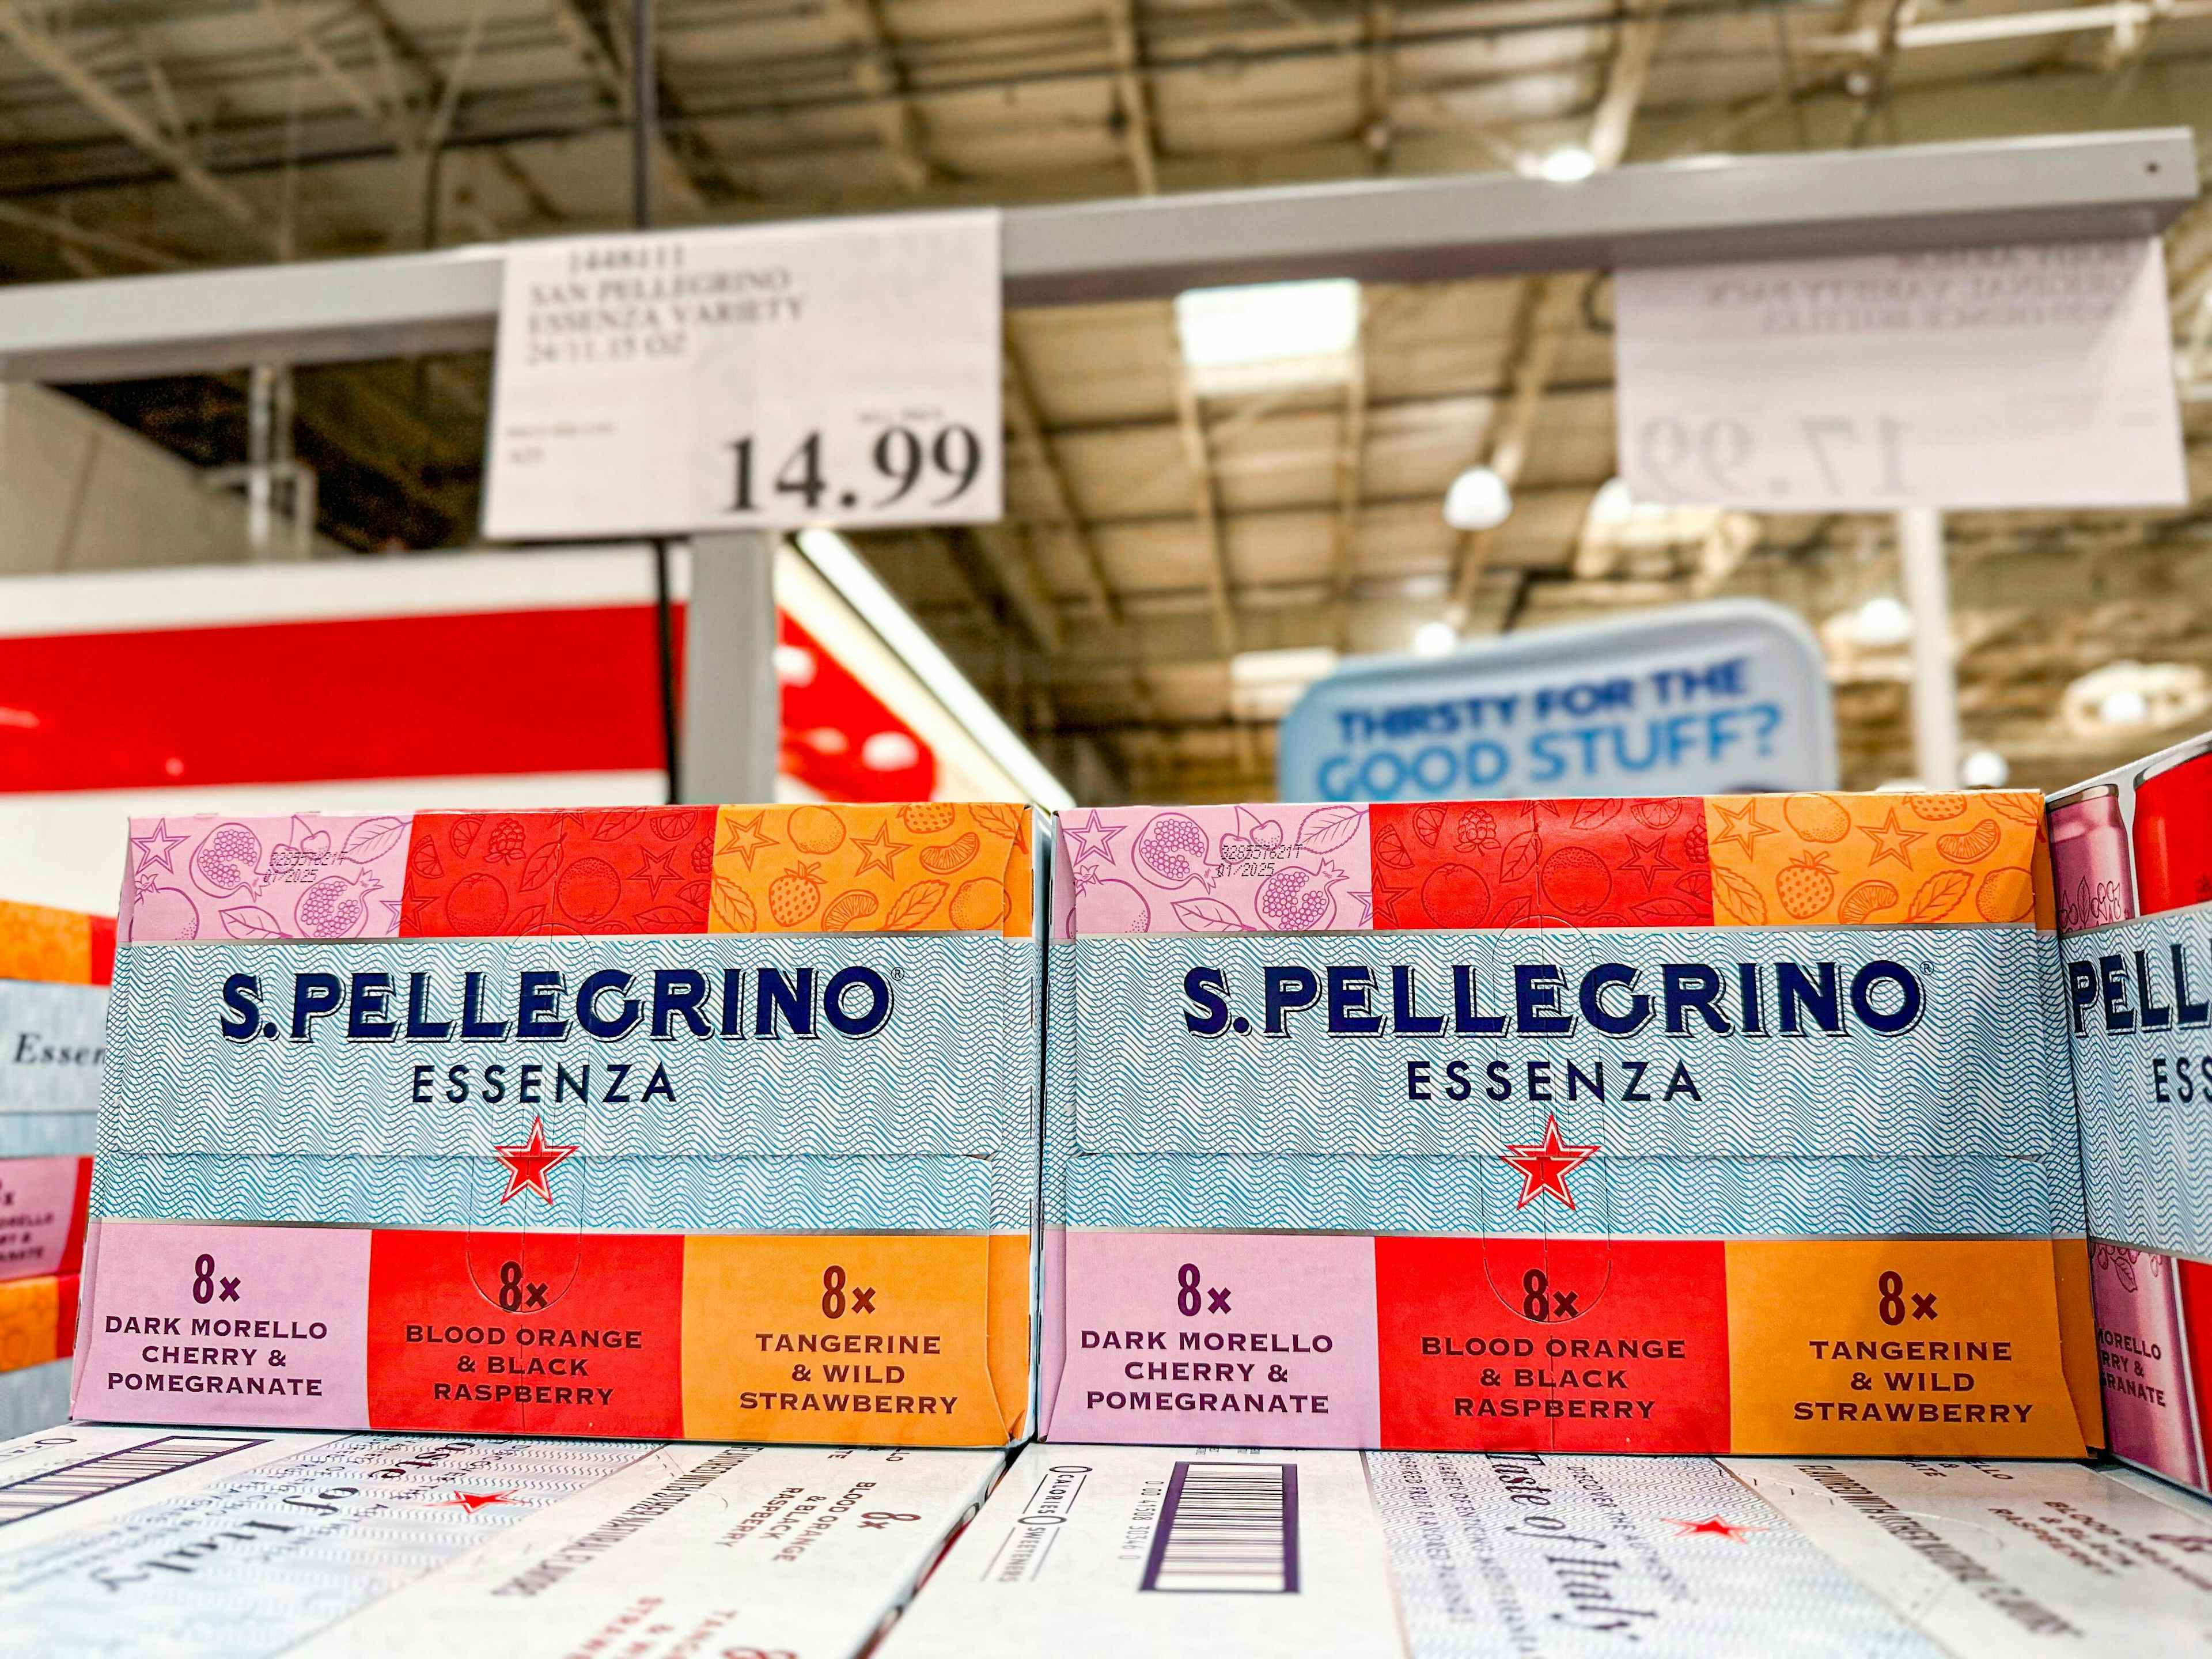 costco-wholesale-prices-going-down-s-pellegrino-sparkling-water-kcl-2